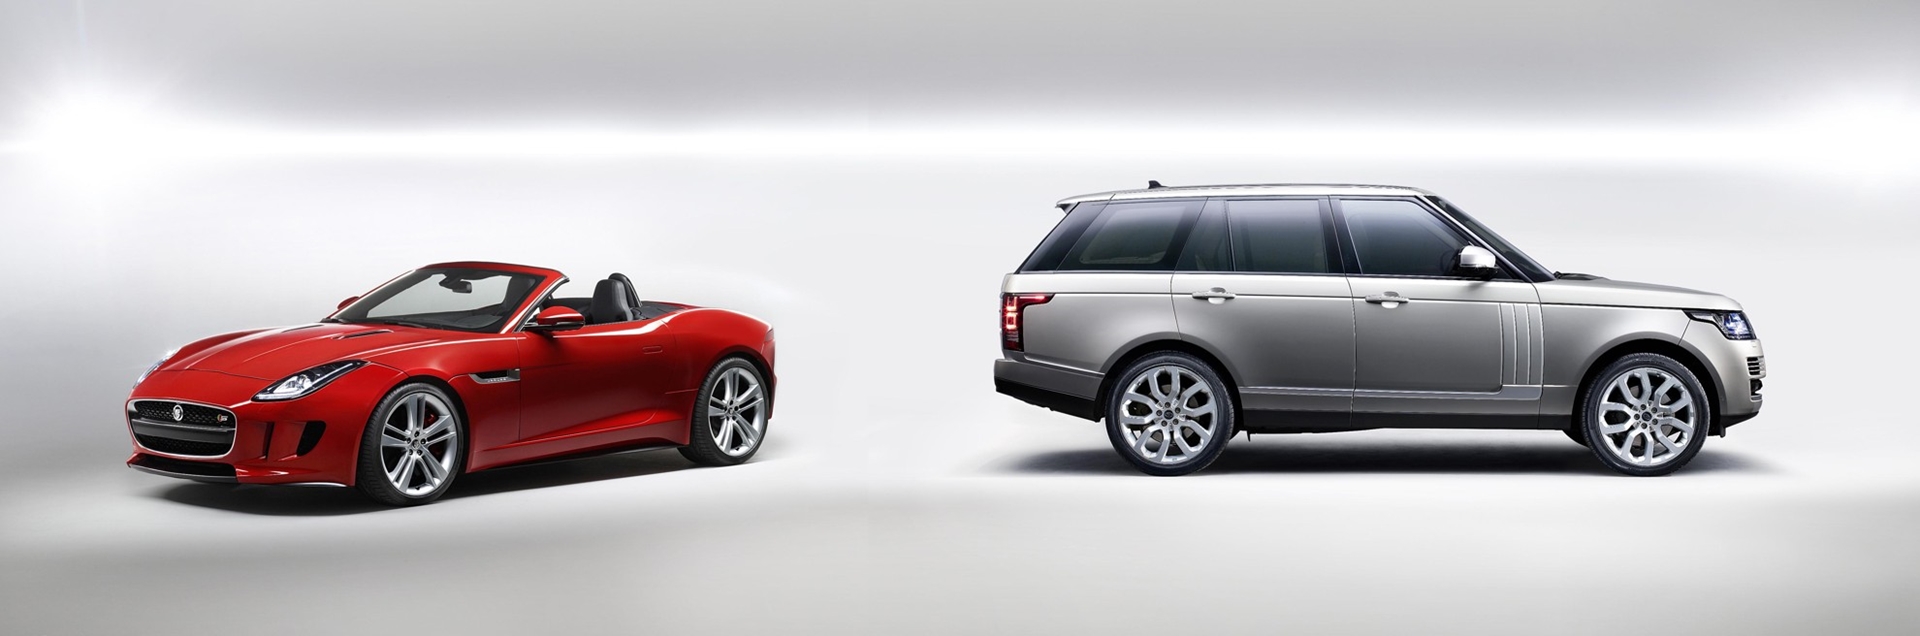 JAGUAR LAND ROVER APPOINTS NEW LAND ROVER IMPORTER AND DISTRIBUTOR IN INDONESIA